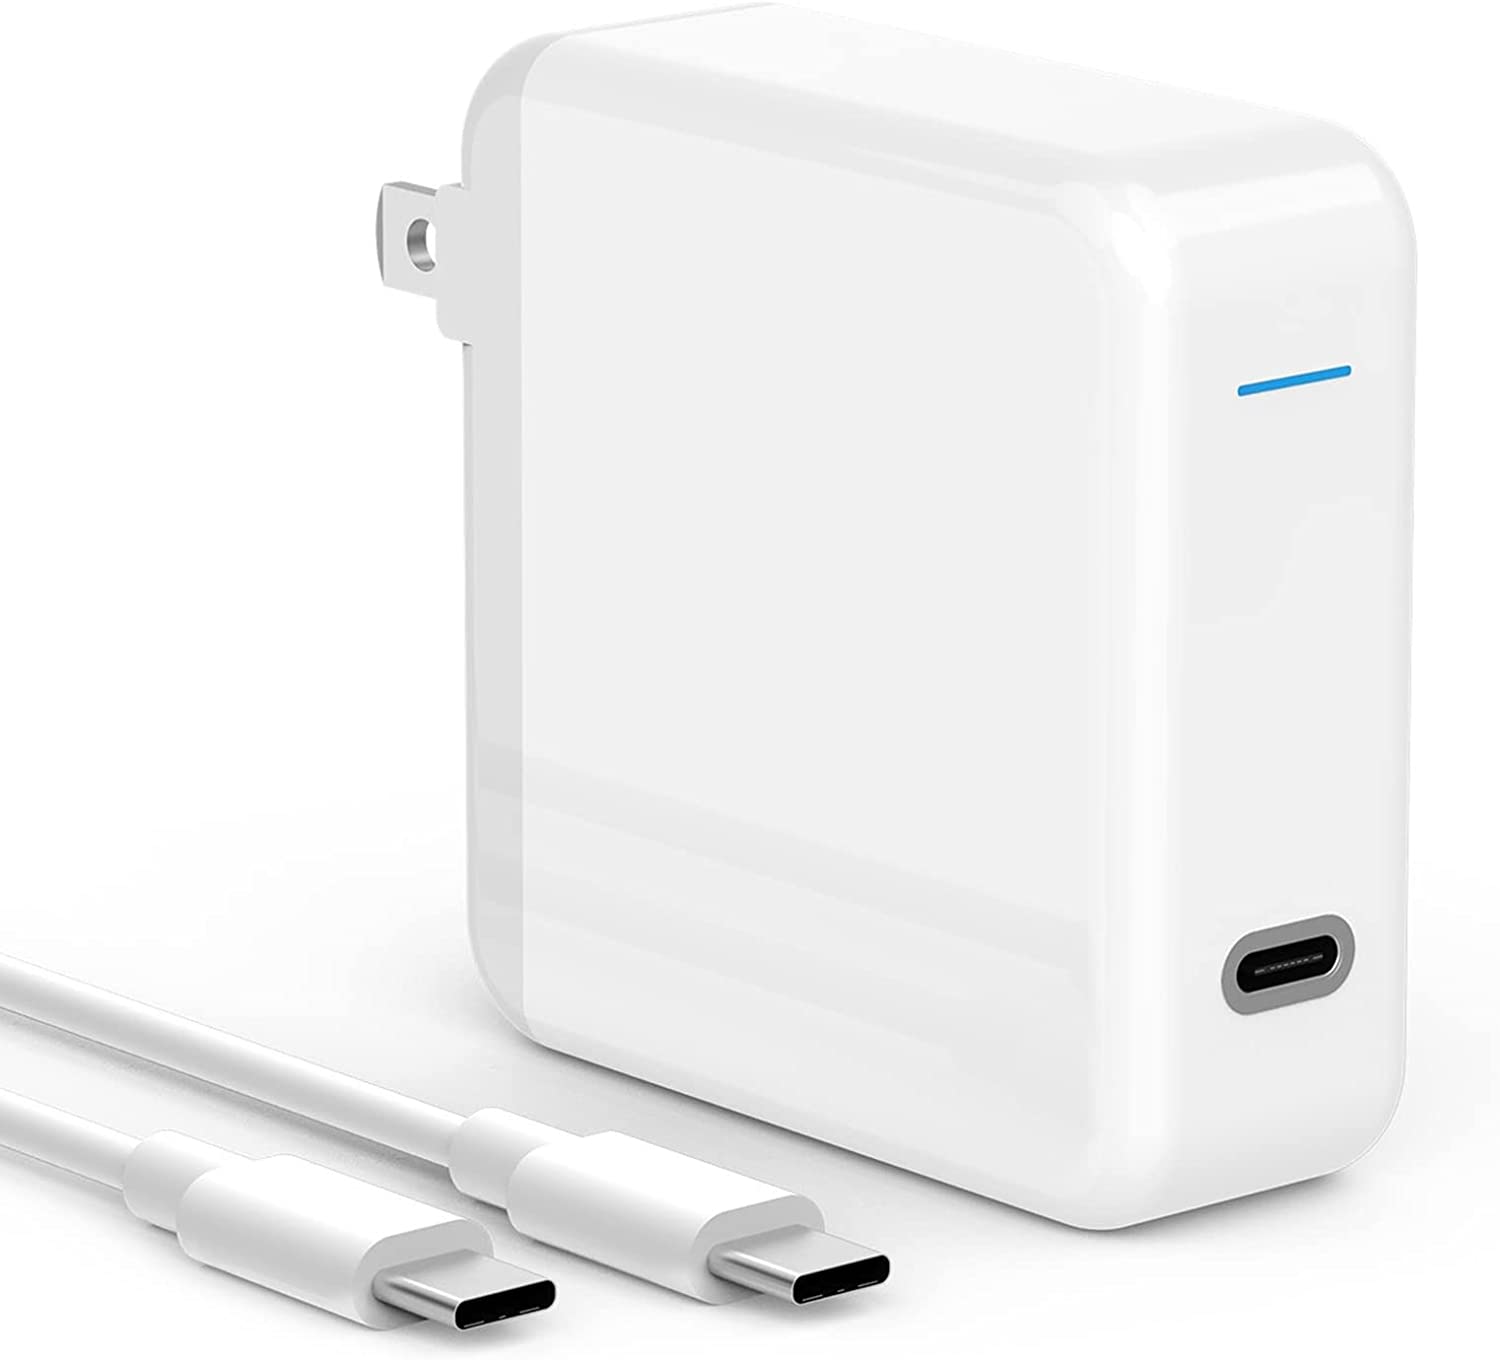 SZpower 61W USB-C Wall Charger for MacBook, iPad, Android, PC (White) - image 1 of 7